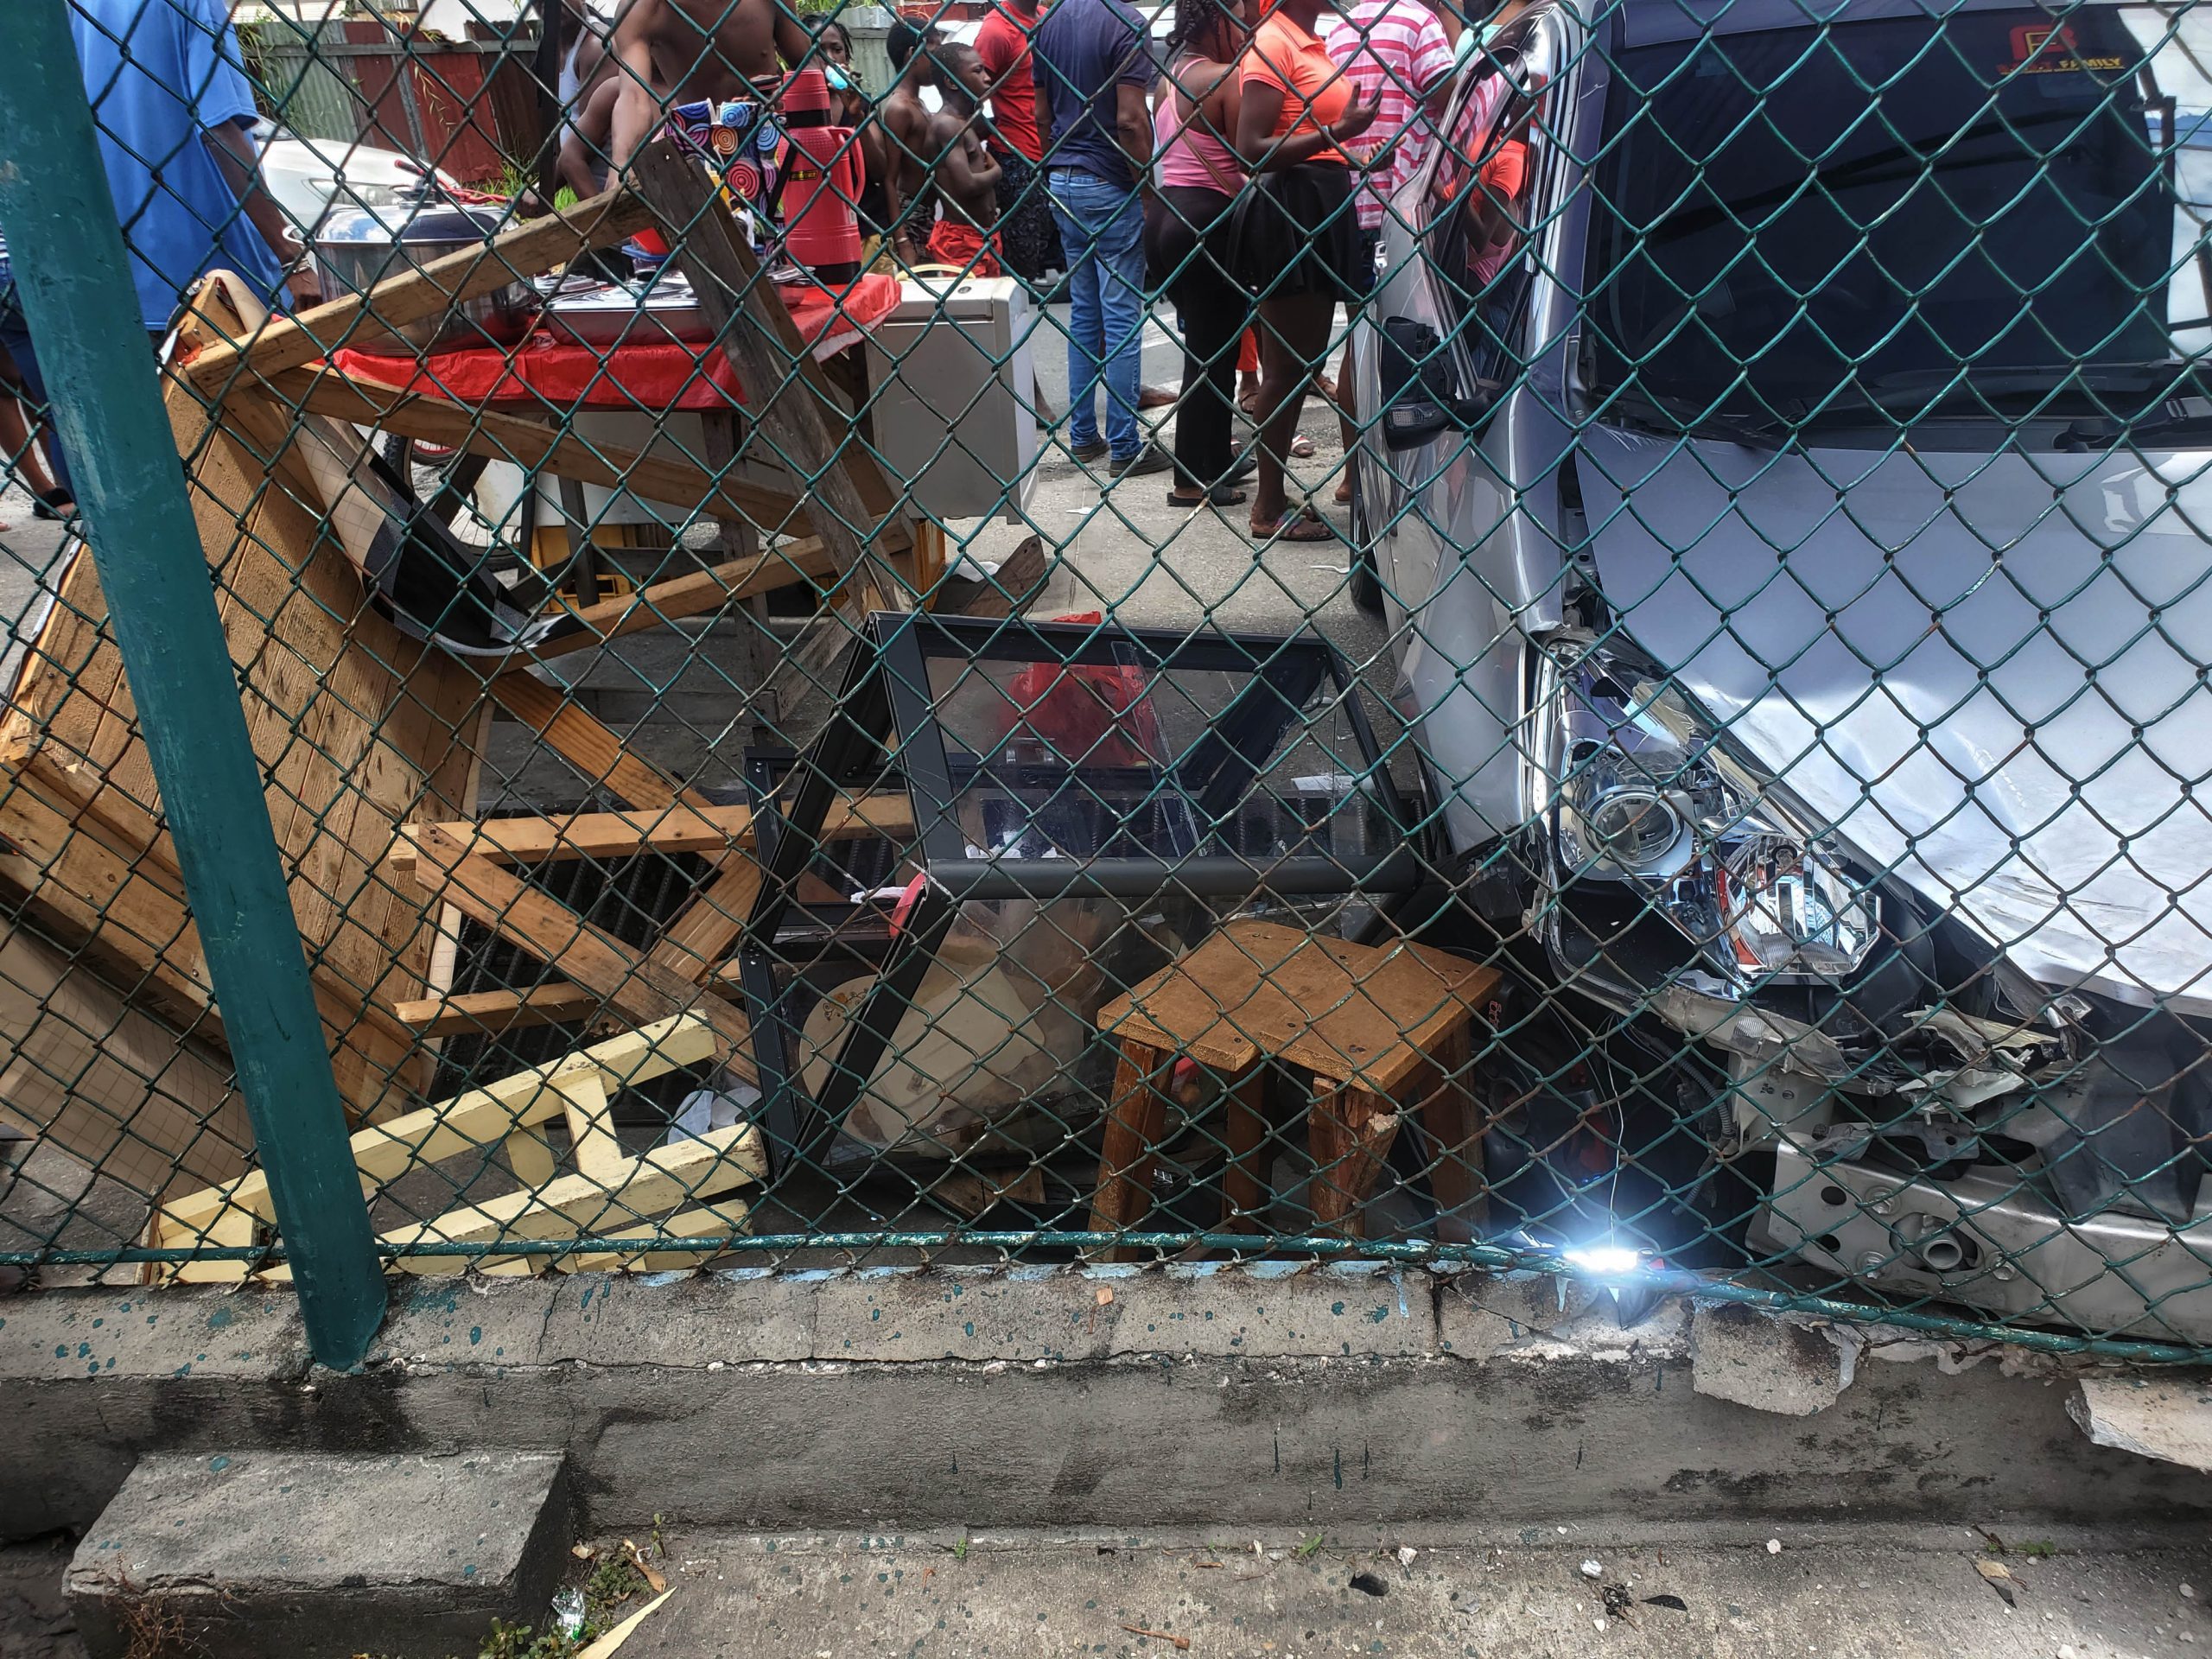 Mother, daughter injured by out-of-control car on George St - Stabroek News